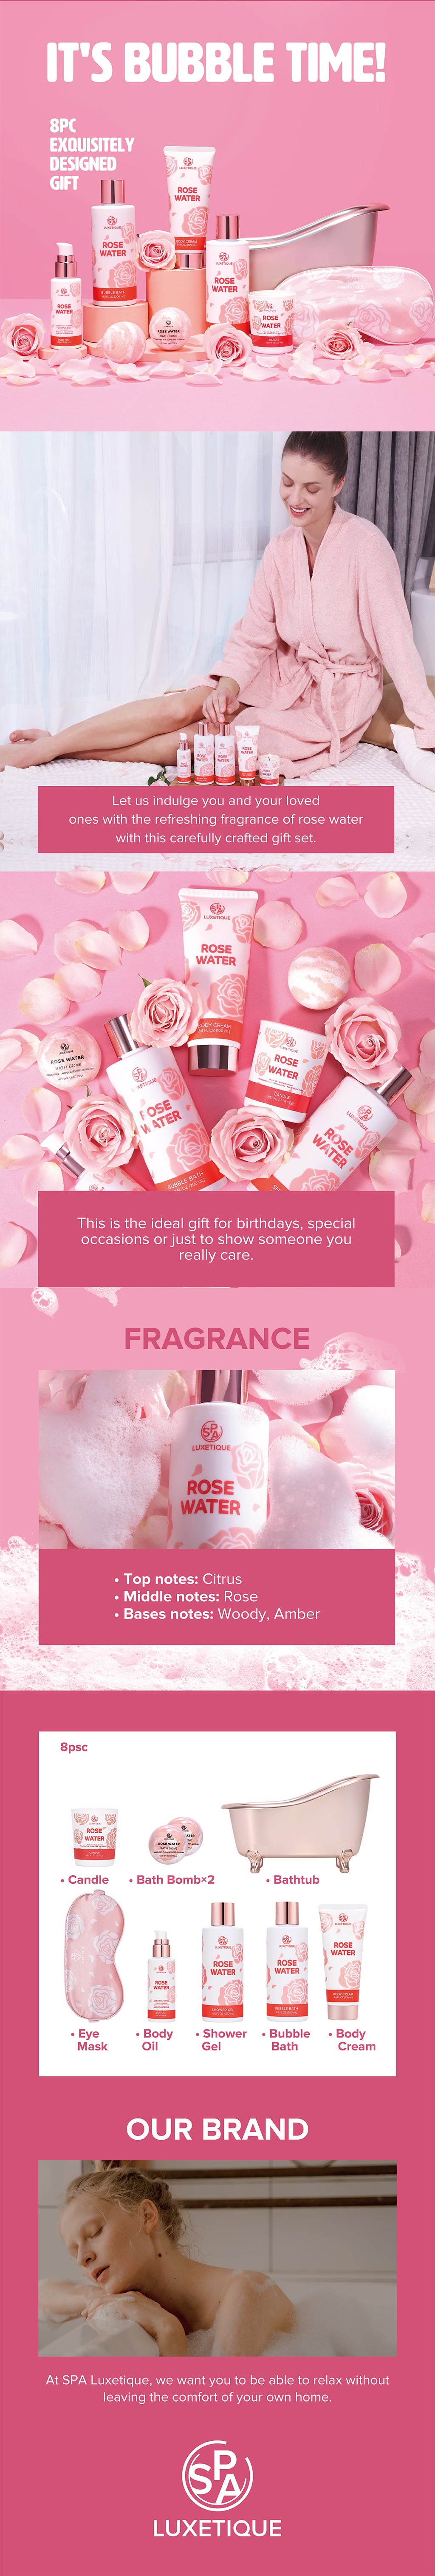 Whenever and wherever, this romantic rose water gift set is good for you and your loved one with delicated rose smelling.  Indulge in a luxurious bathing experience with this exquisite 8-piece gift set. Pamper yourself and your loved ones with a selection of premium personal care products, including Shower Gel, Candle, Body Oil, Eye Mask and more. The stunning bathtub can serve as both a decorative item and practical storage solution.   Celebrate special moments in life, such as birthdays, anniversaries, Valentine's Day, Mother's Day, or simply treat yourself to a moment of relaxation and rejuvenation with this expertly crafted gift set.  Immerse yourself in the soothing aroma of rose water and enjoy the ultimate spa experience right in the comfort of your own home.  It's Bubble Time! Shower gel/Bubble bath: Rose oil/Aloe/Vitamin E/Castor oil/ Body cream/Hand cream:Shea butter/Coconut oil/Sunflower seed oil/Rose oil/Vitamin E/ Body oil:Grape seed oil/Coconut oil/Sunflower seed oil/Almond oil/Vitamin E/Shea butter/ Body scrub:Grape seed oil/Almond oil/Rose oil/Collagen/ Bath bomb: Rose oil/Coconut oil/Vitamin E/Shea butter. Rose oil (Shower gel/Bubble bath/Bath bomb): Refining and glowing Shea butter (Body cream/Hand cream): Boosts moisture and soften Himalayan salt & Collagen (Body scrub): Nutrition and clarity,help skin strenght and elasticity, skin PH balance Almond oil & Coconut oil (Body oil): Moisturzing and smoothing Vitamin E(Body oil & Body cream & Shower gel& Bubble bath): Moisturizing  No Paraben/Phthalates/ Gluten free Not tested on animals.